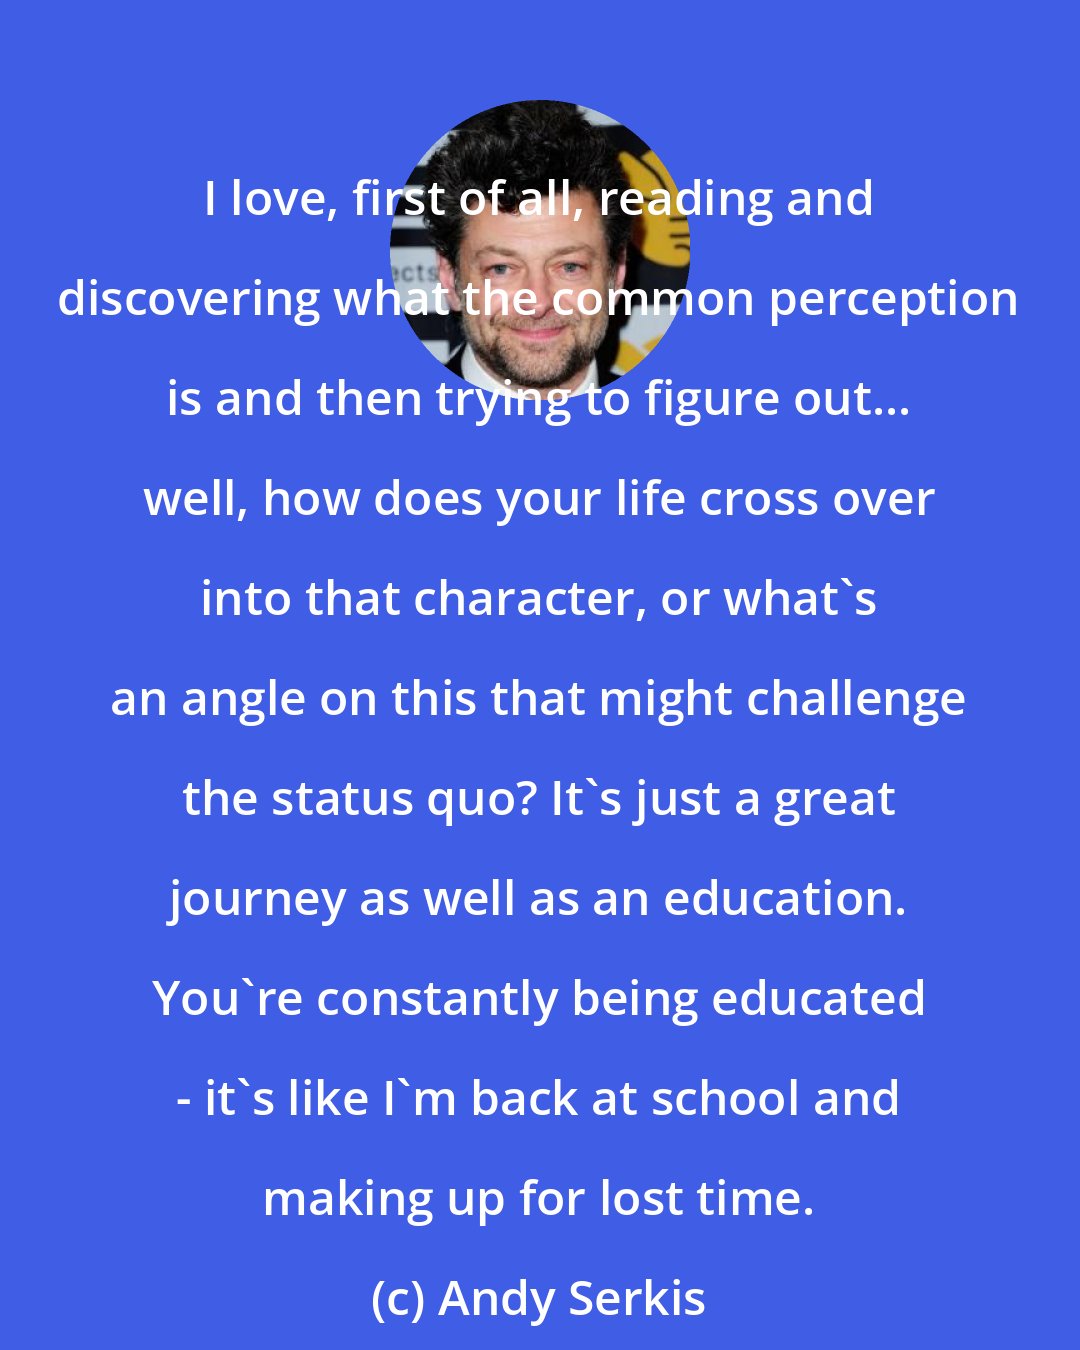 Andy Serkis: I love, first of all, reading and discovering what the common perception is and then trying to figure out... well, how does your life cross over into that character, or what's an angle on this that might challenge the status quo? It's just a great journey as well as an education. You're constantly being educated - it's like I'm back at school and making up for lost time.